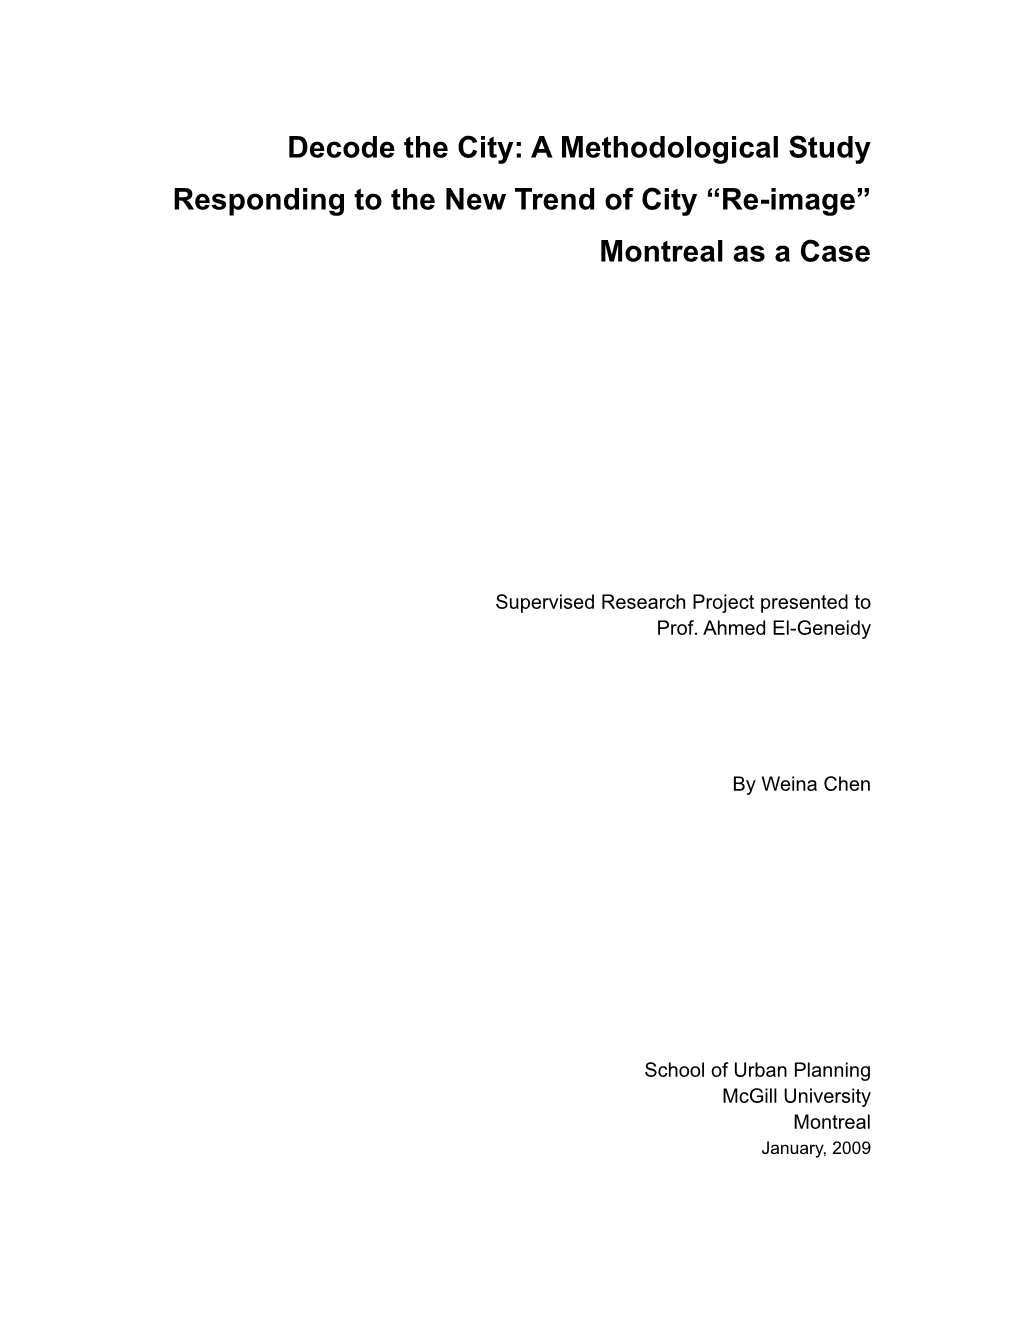 Decode the City: a Methodological Study Responding to the New Trend of City “Re-Image” Montreal As a Case